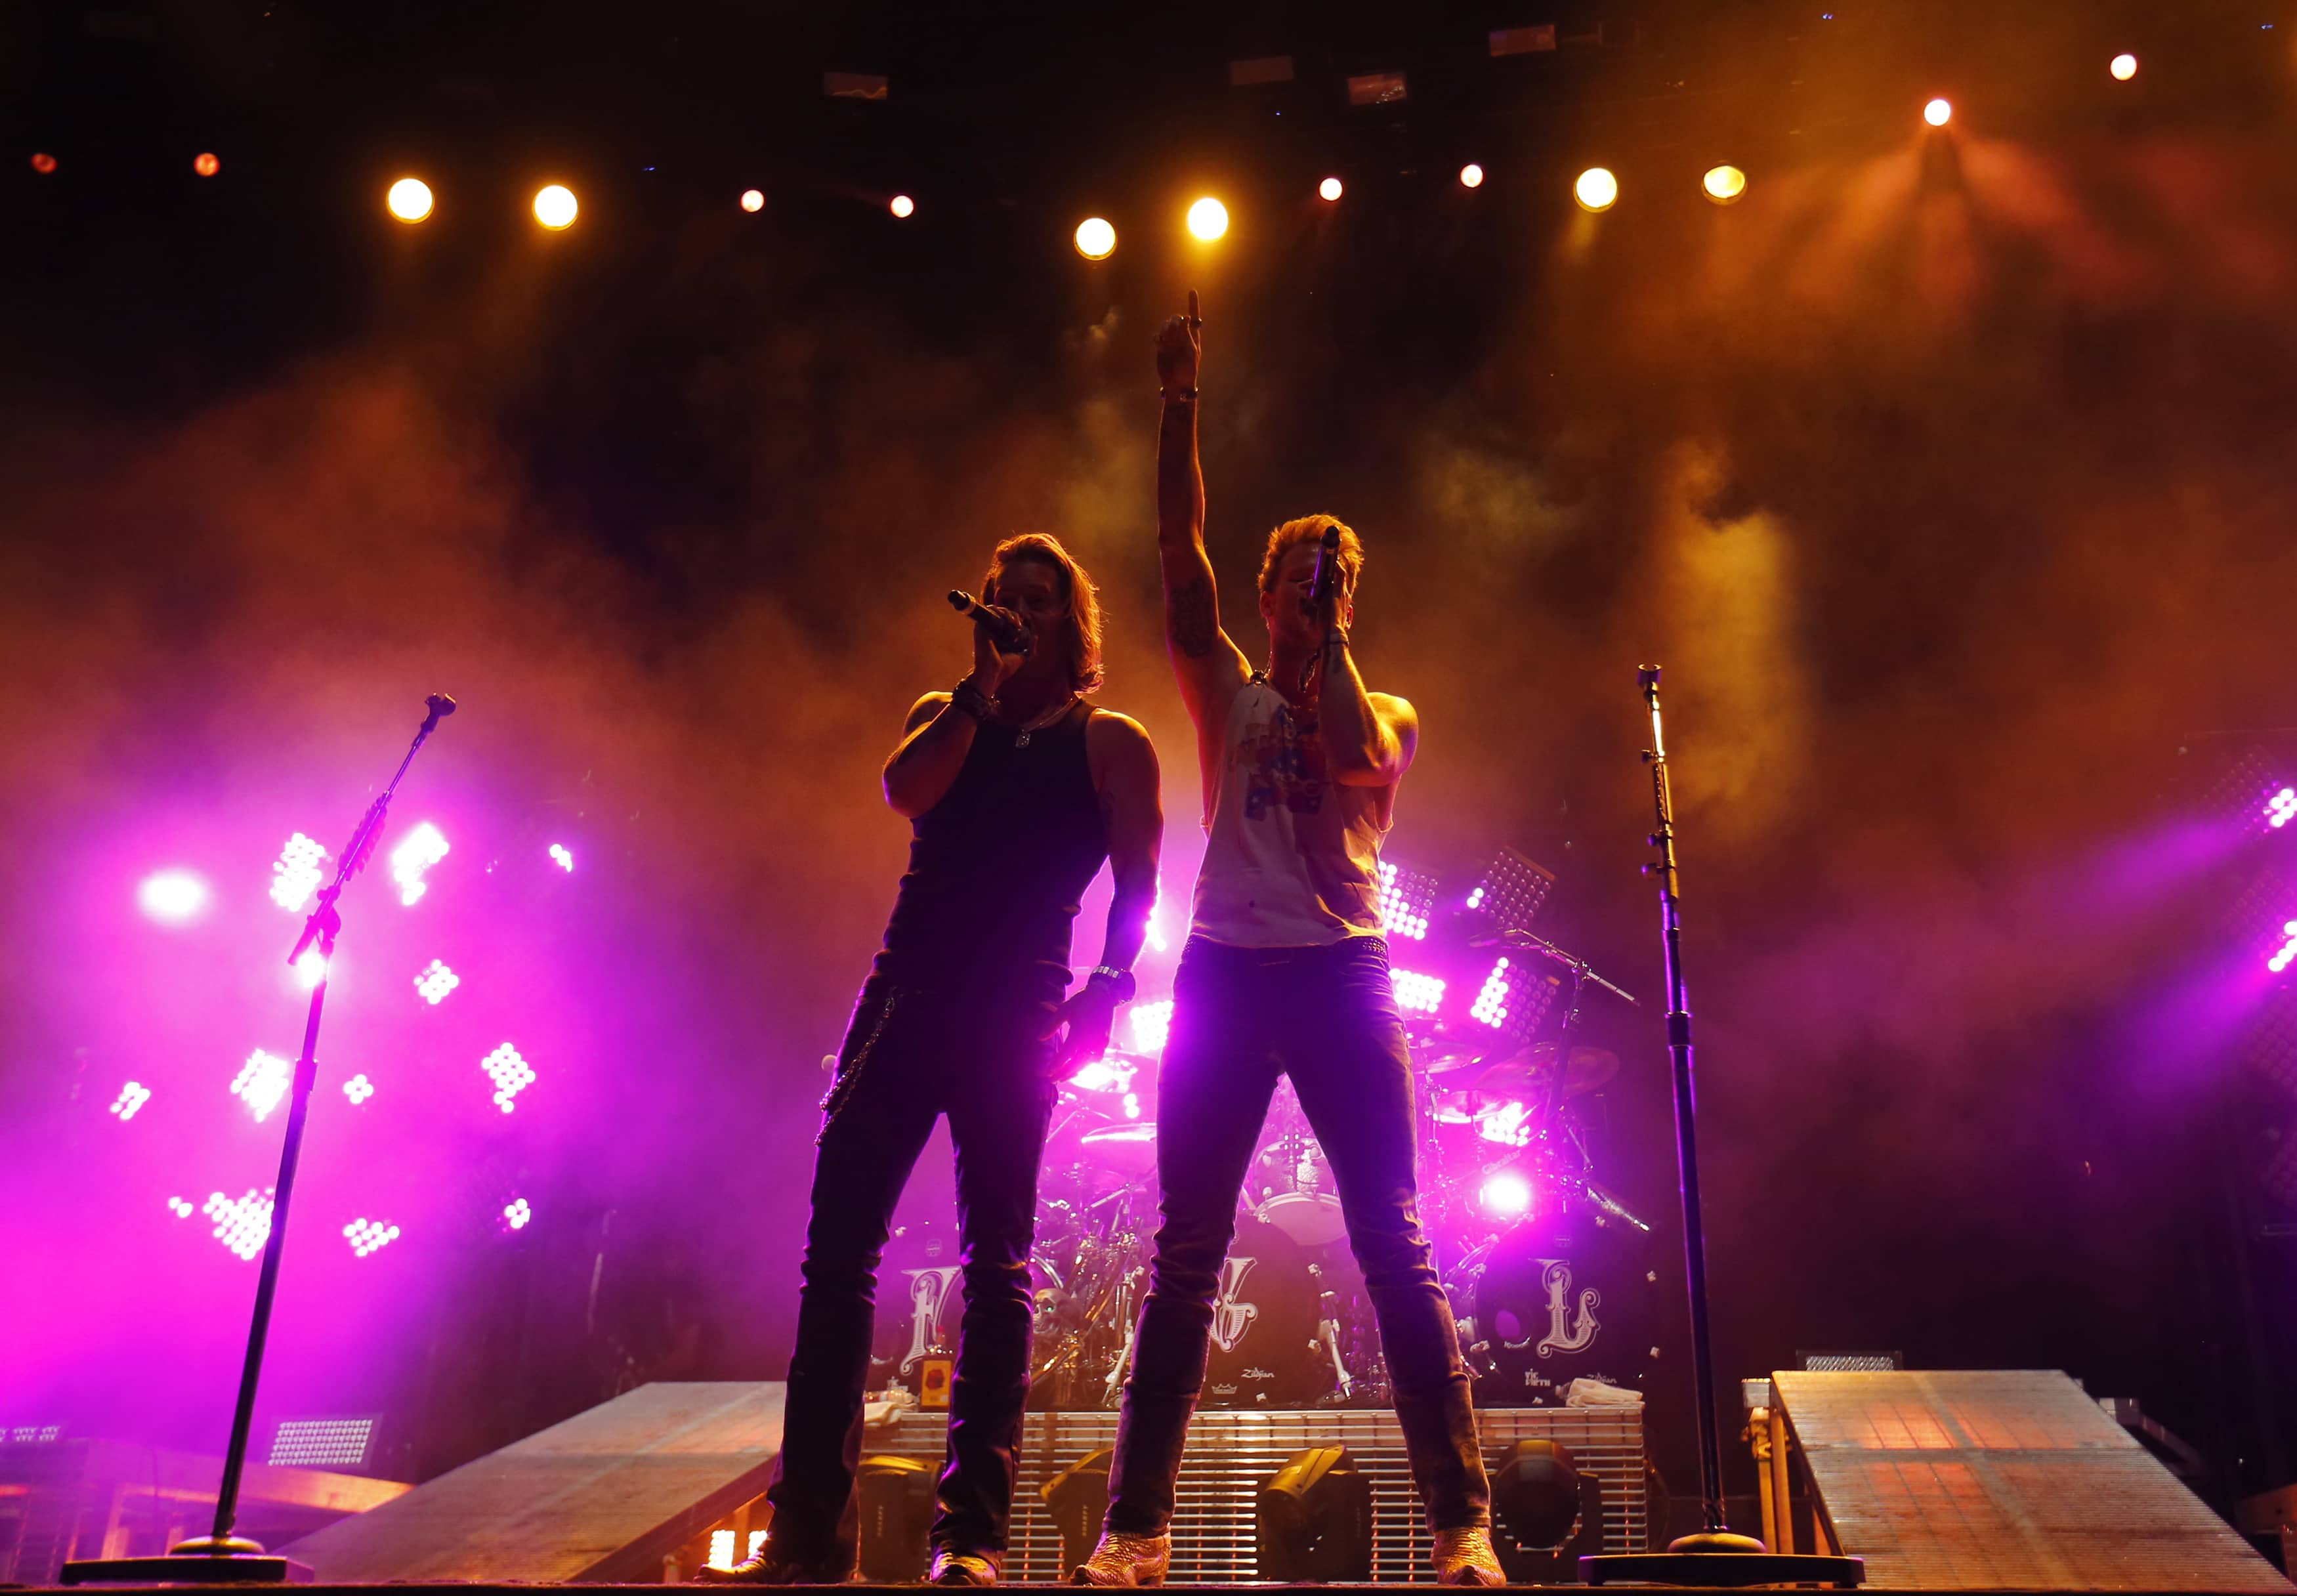 brian-kelley-and-tyler-hubbard-of-country-pop-group-florida-georgia-line-perform-during-final-day-of-stagecoach-country-music-festival-in-indio-california